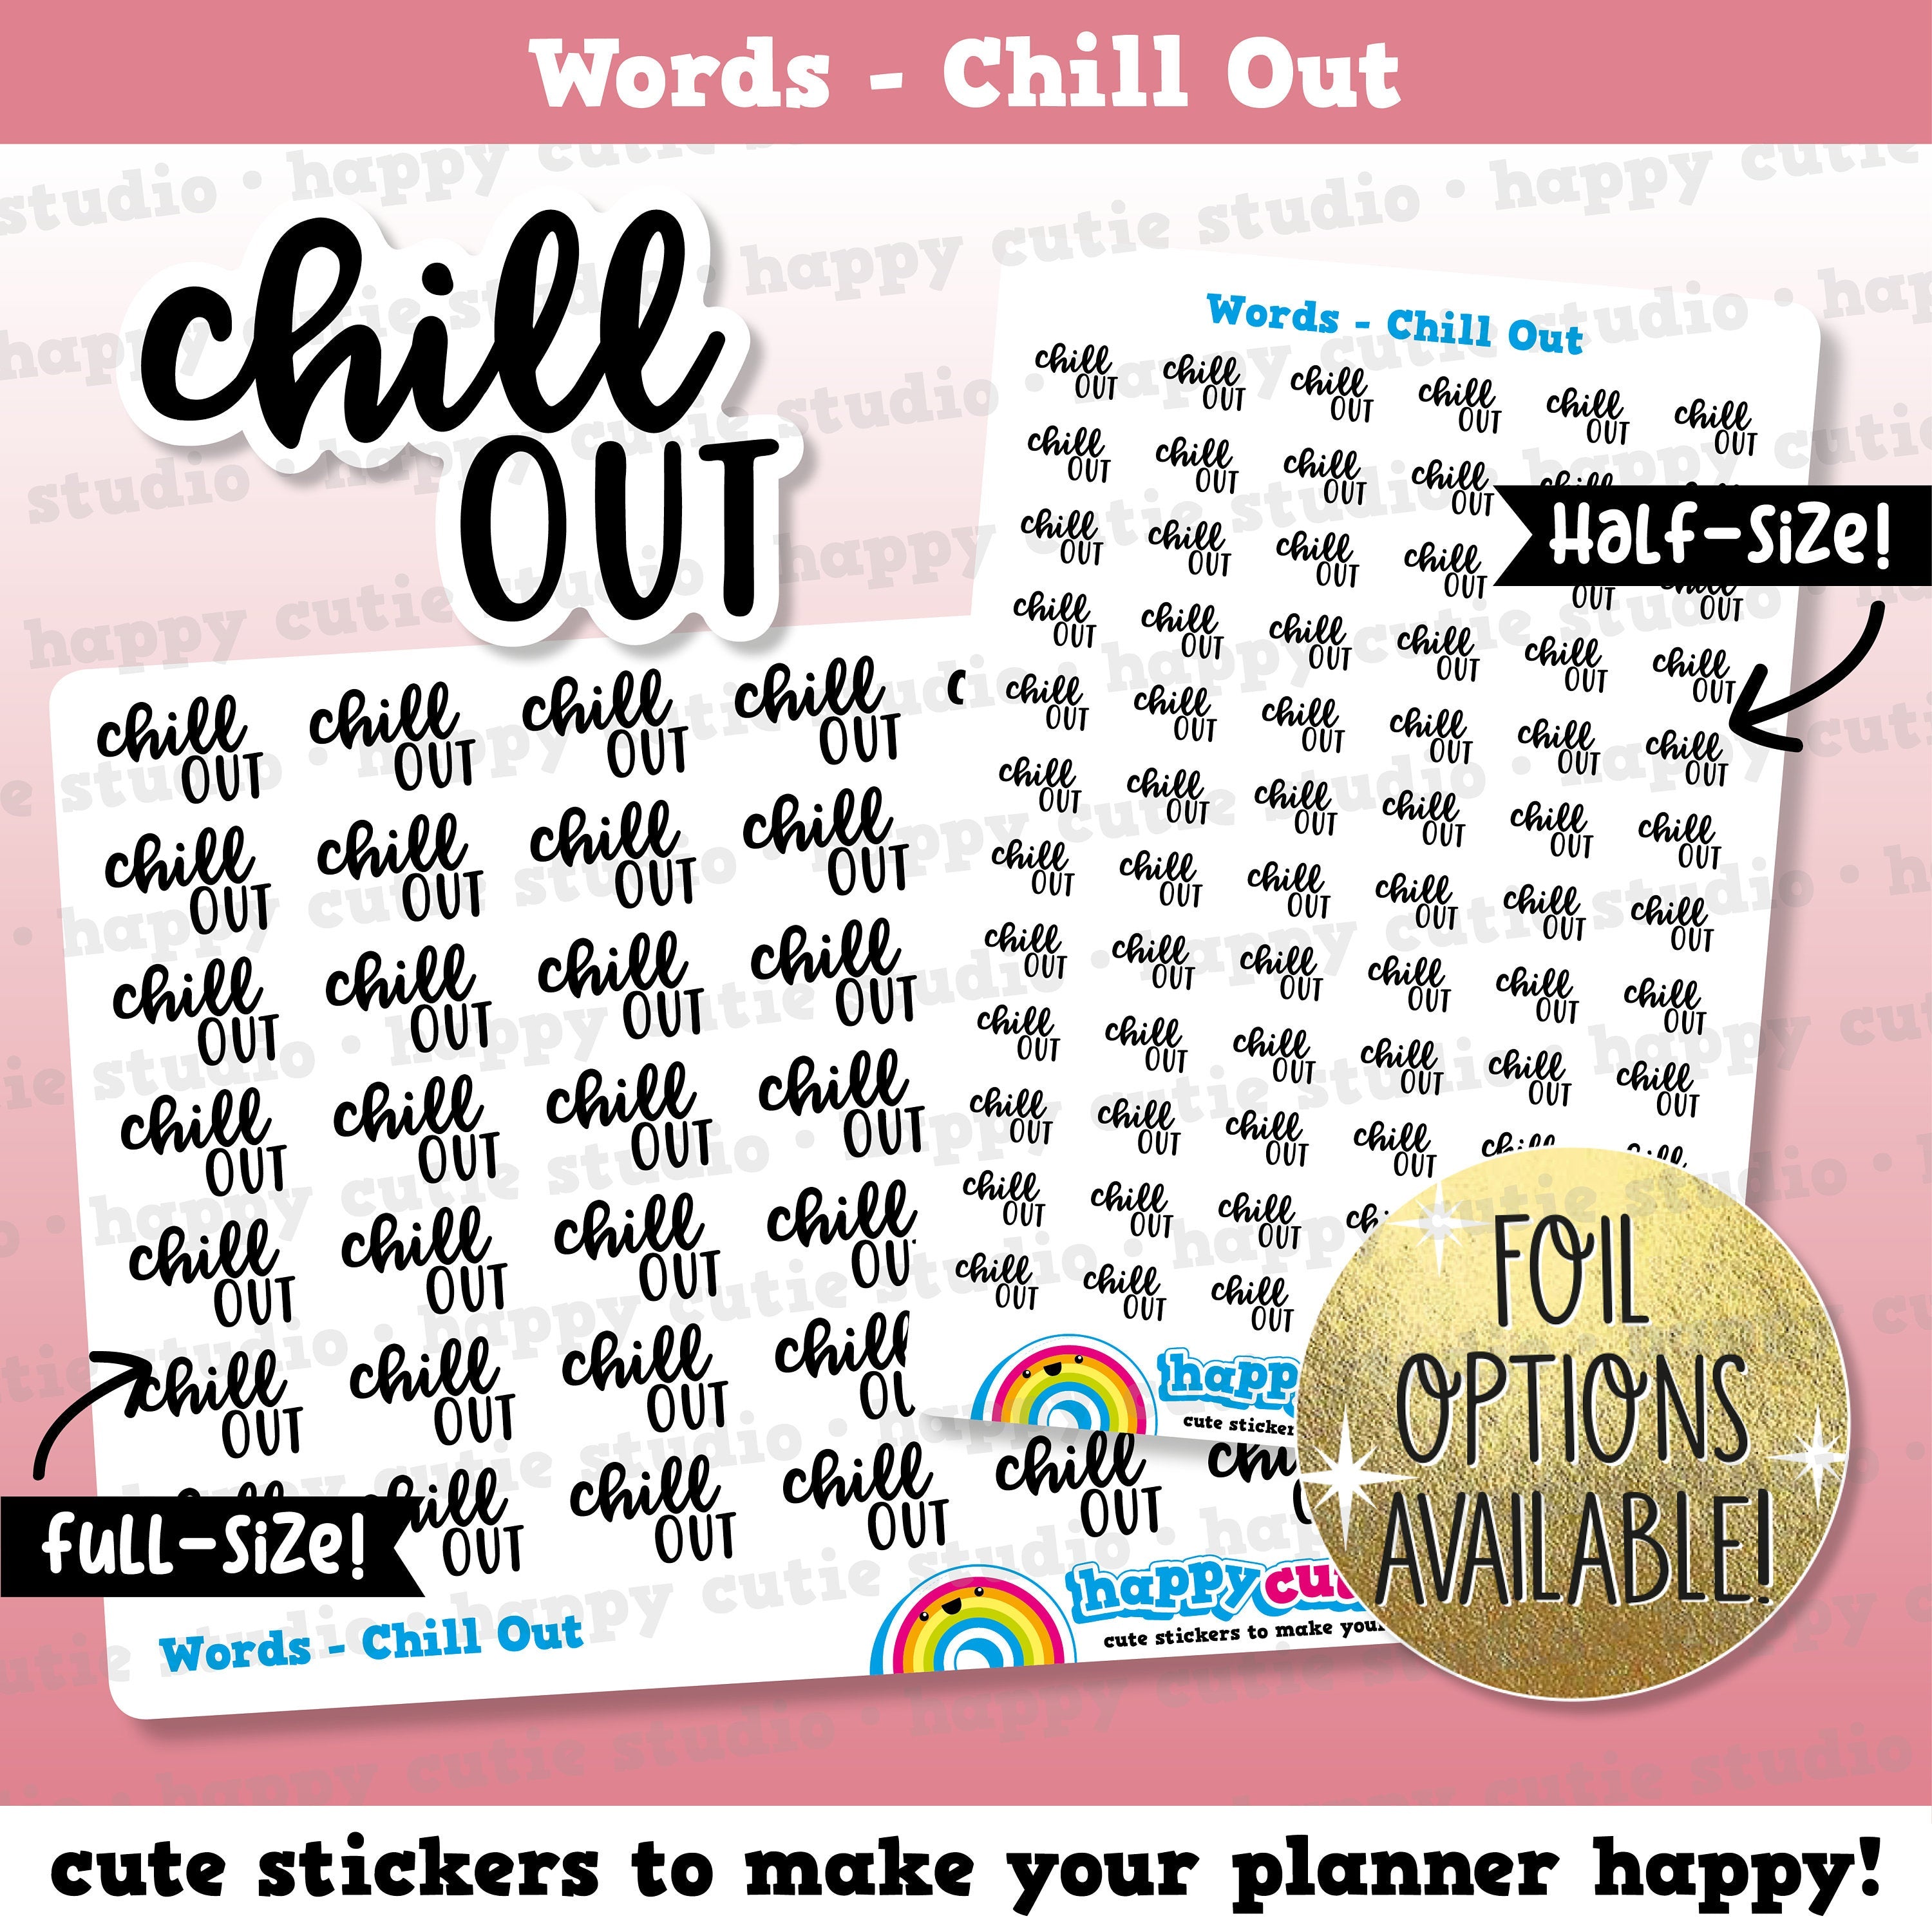 Chill Out Words/Banners/Functional /Foil Planner Stickers